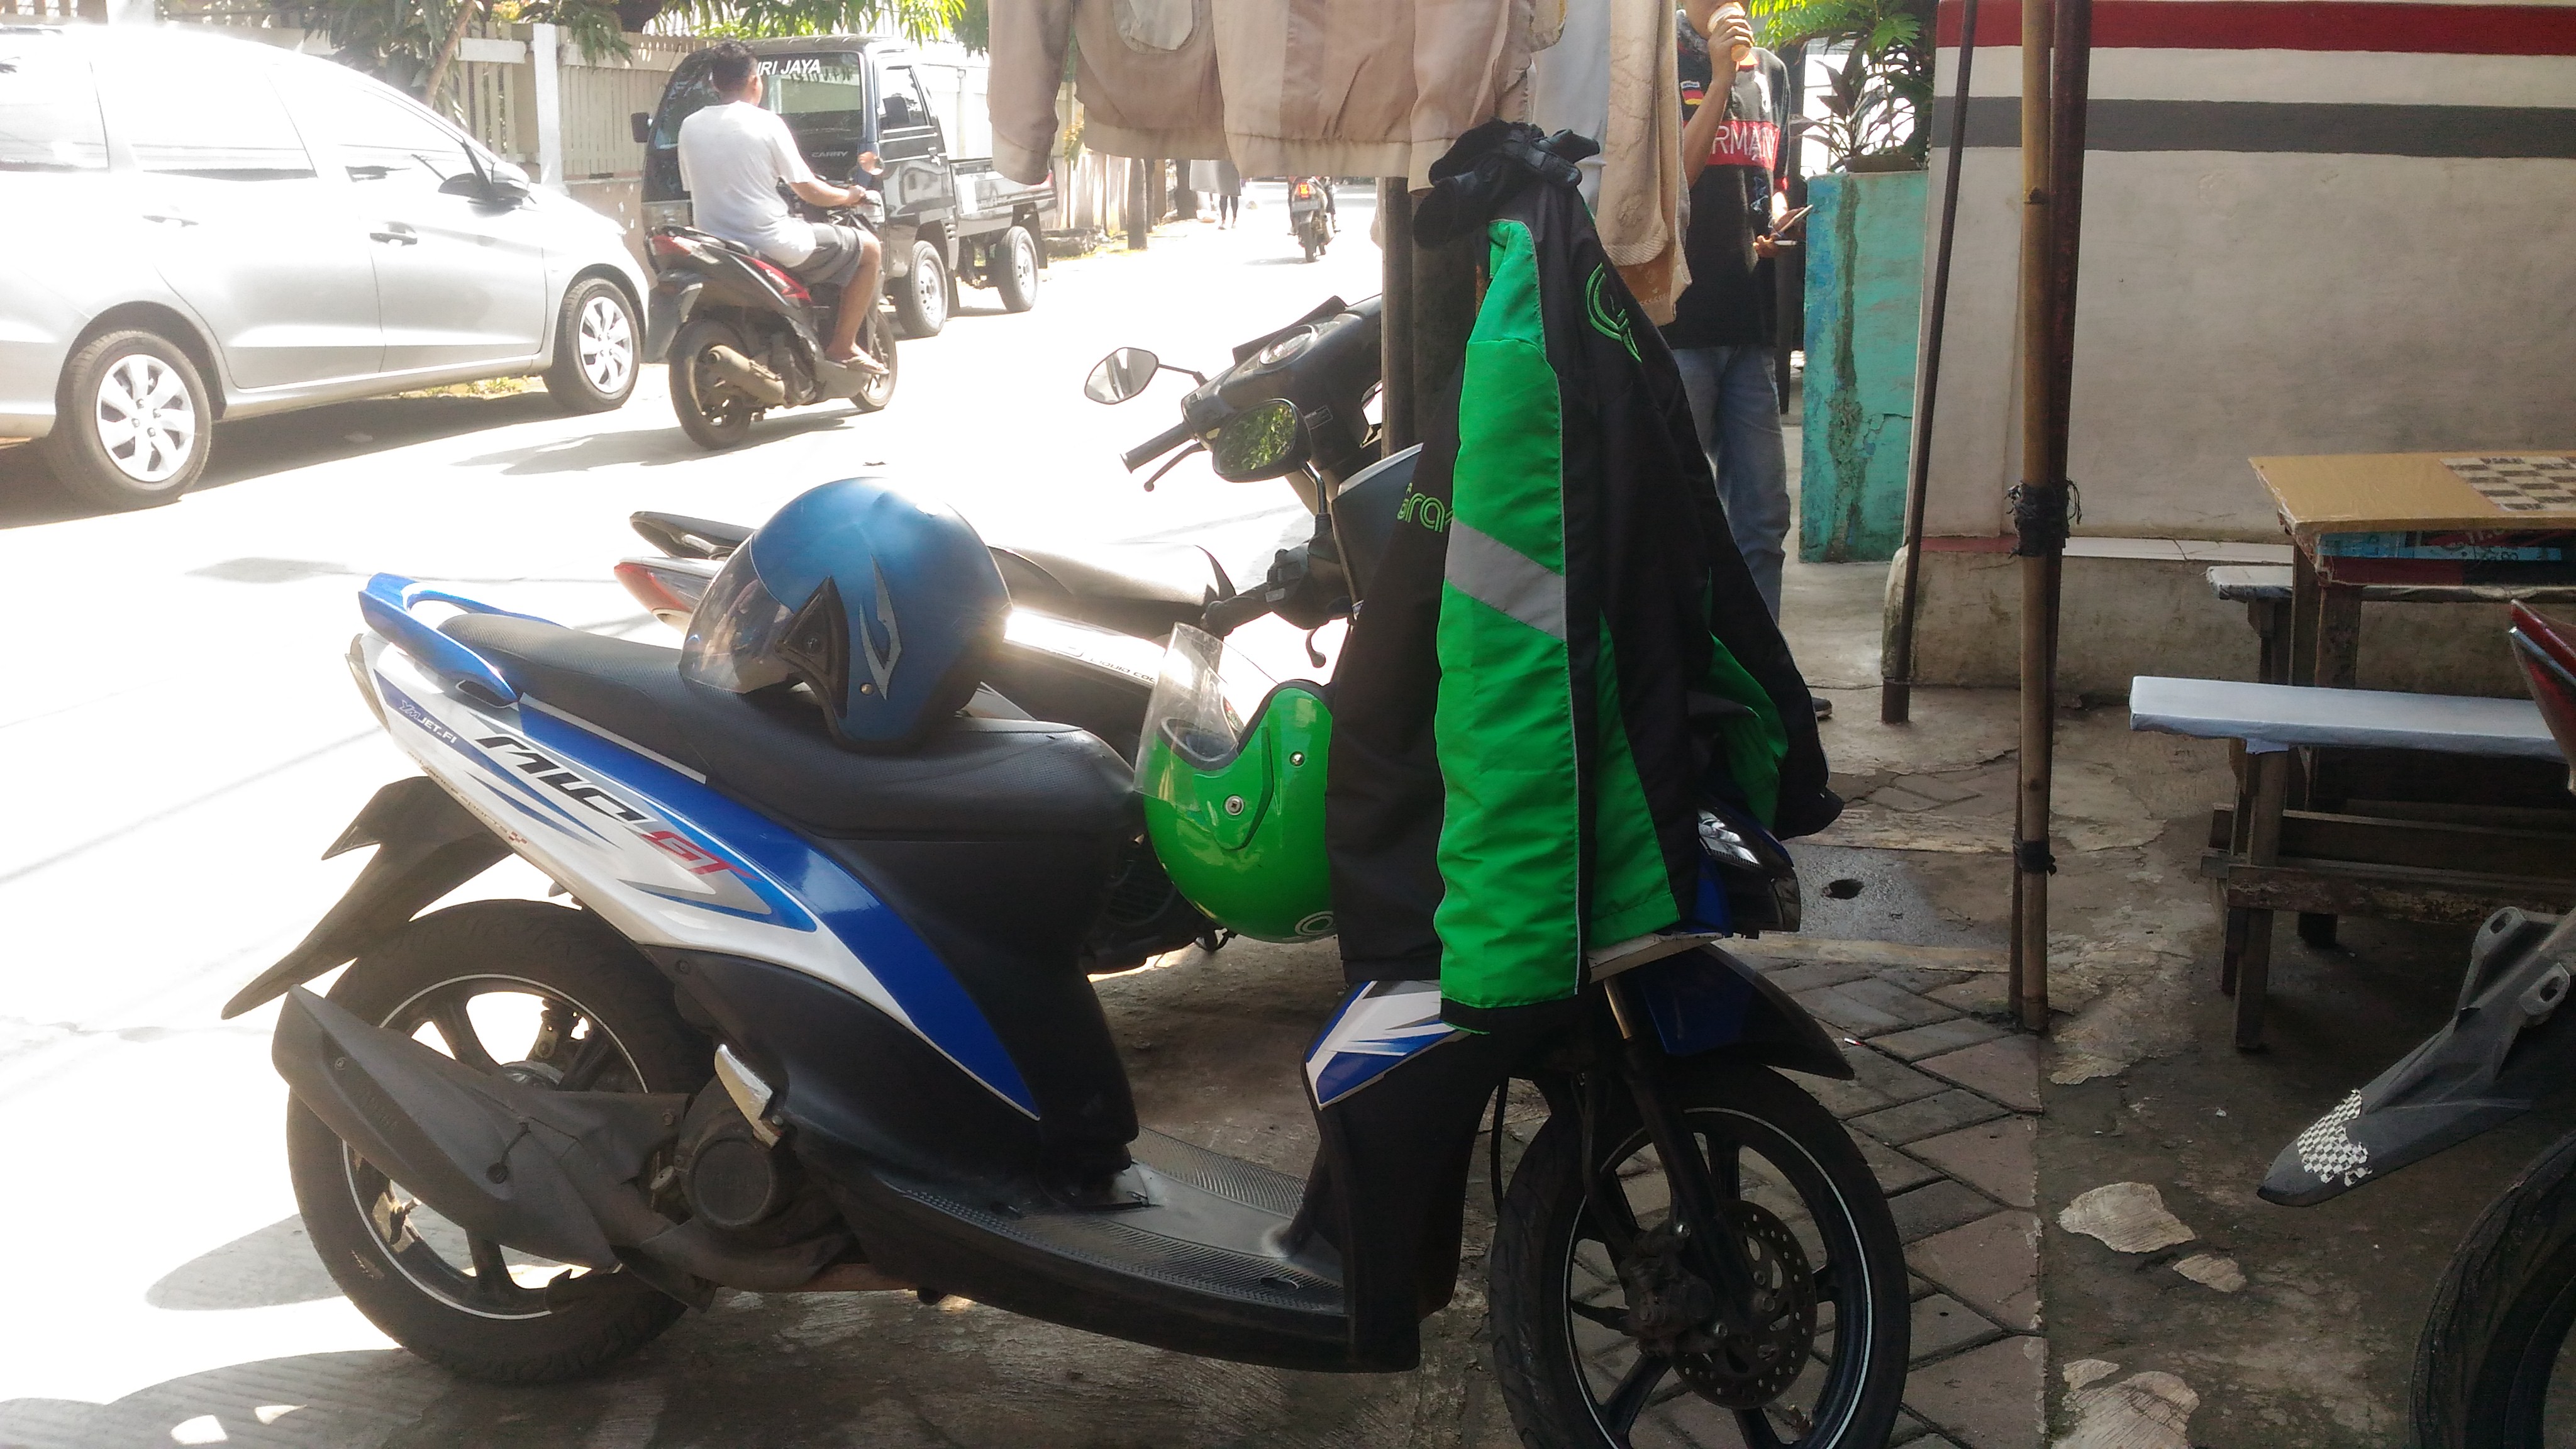 GO-JEK is probably the most popular way to get around in Jakarta. Here the driver had stopped for tea.